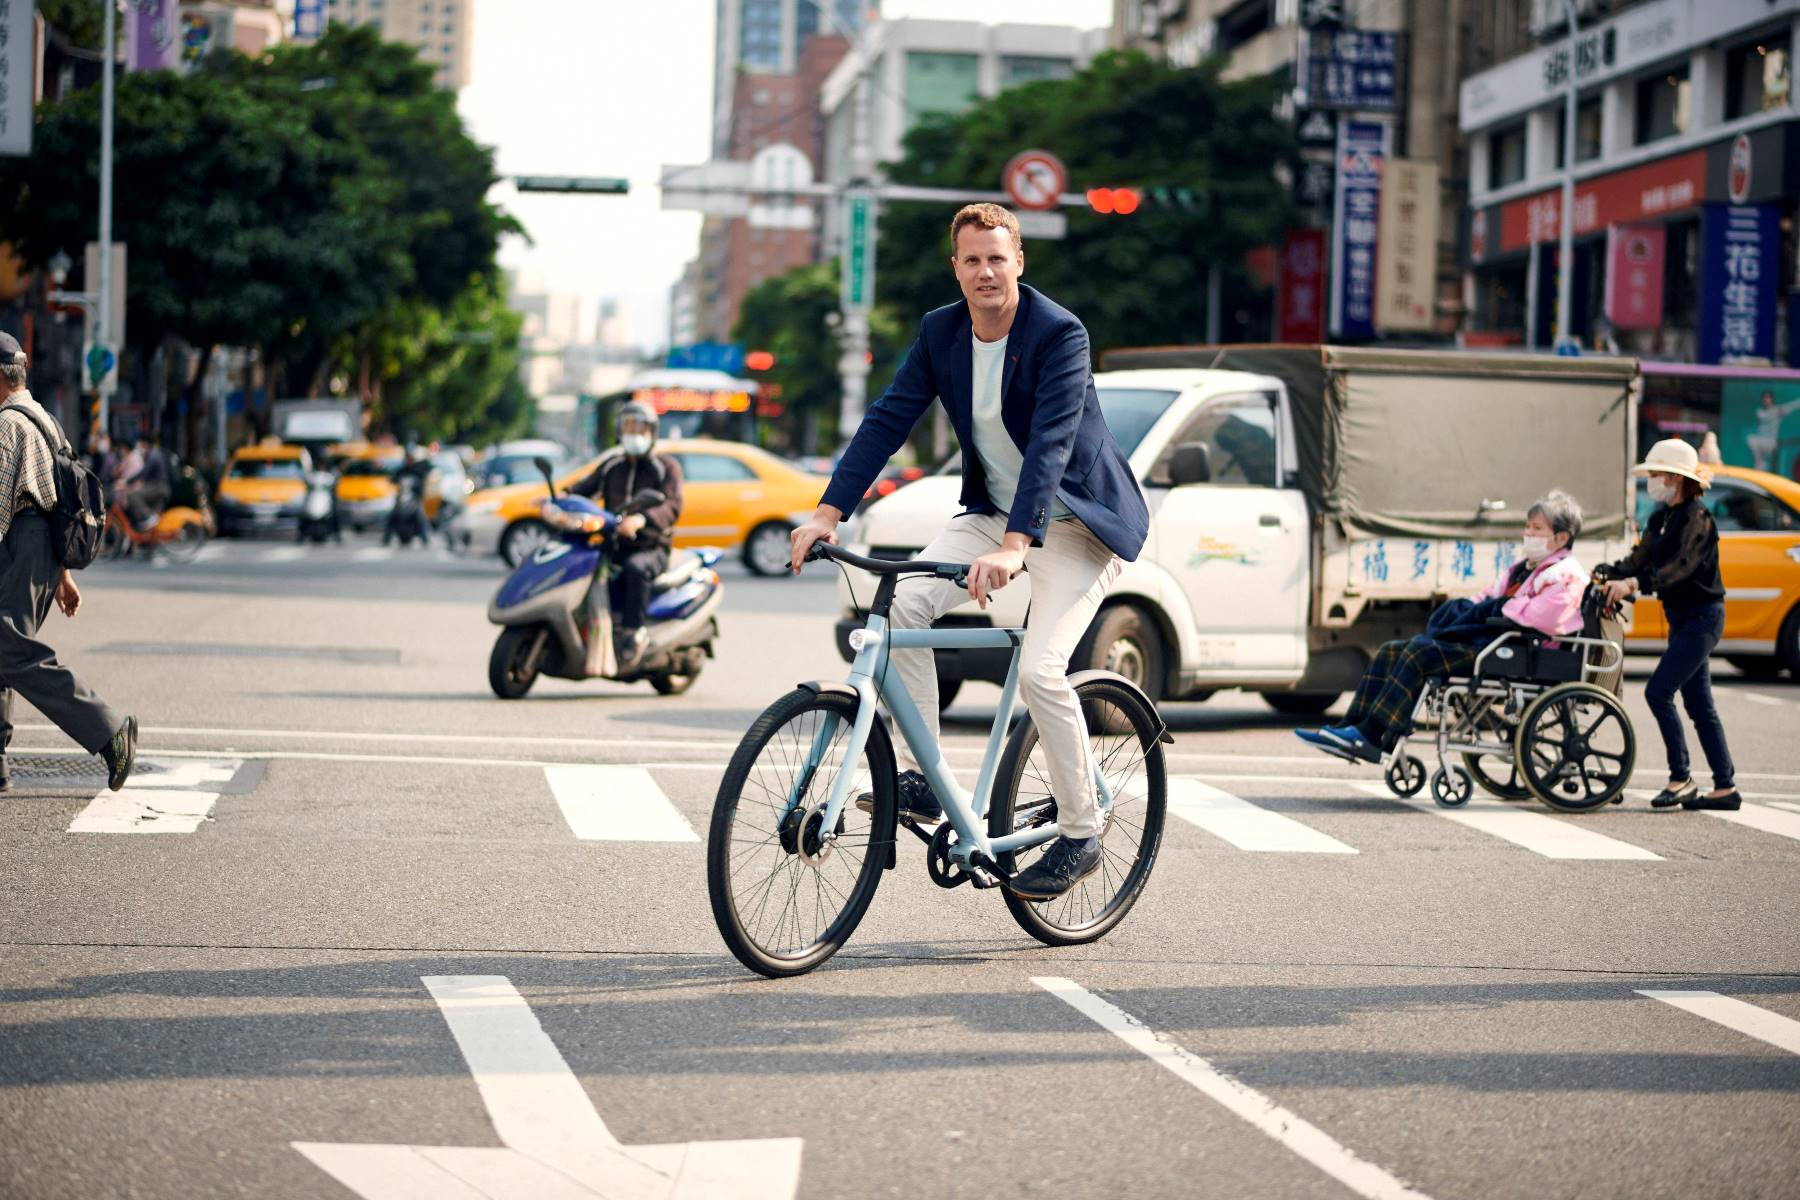 New Beginnings For VanMoof: Lavoie Acquires Bankrupt E-Bike Startup